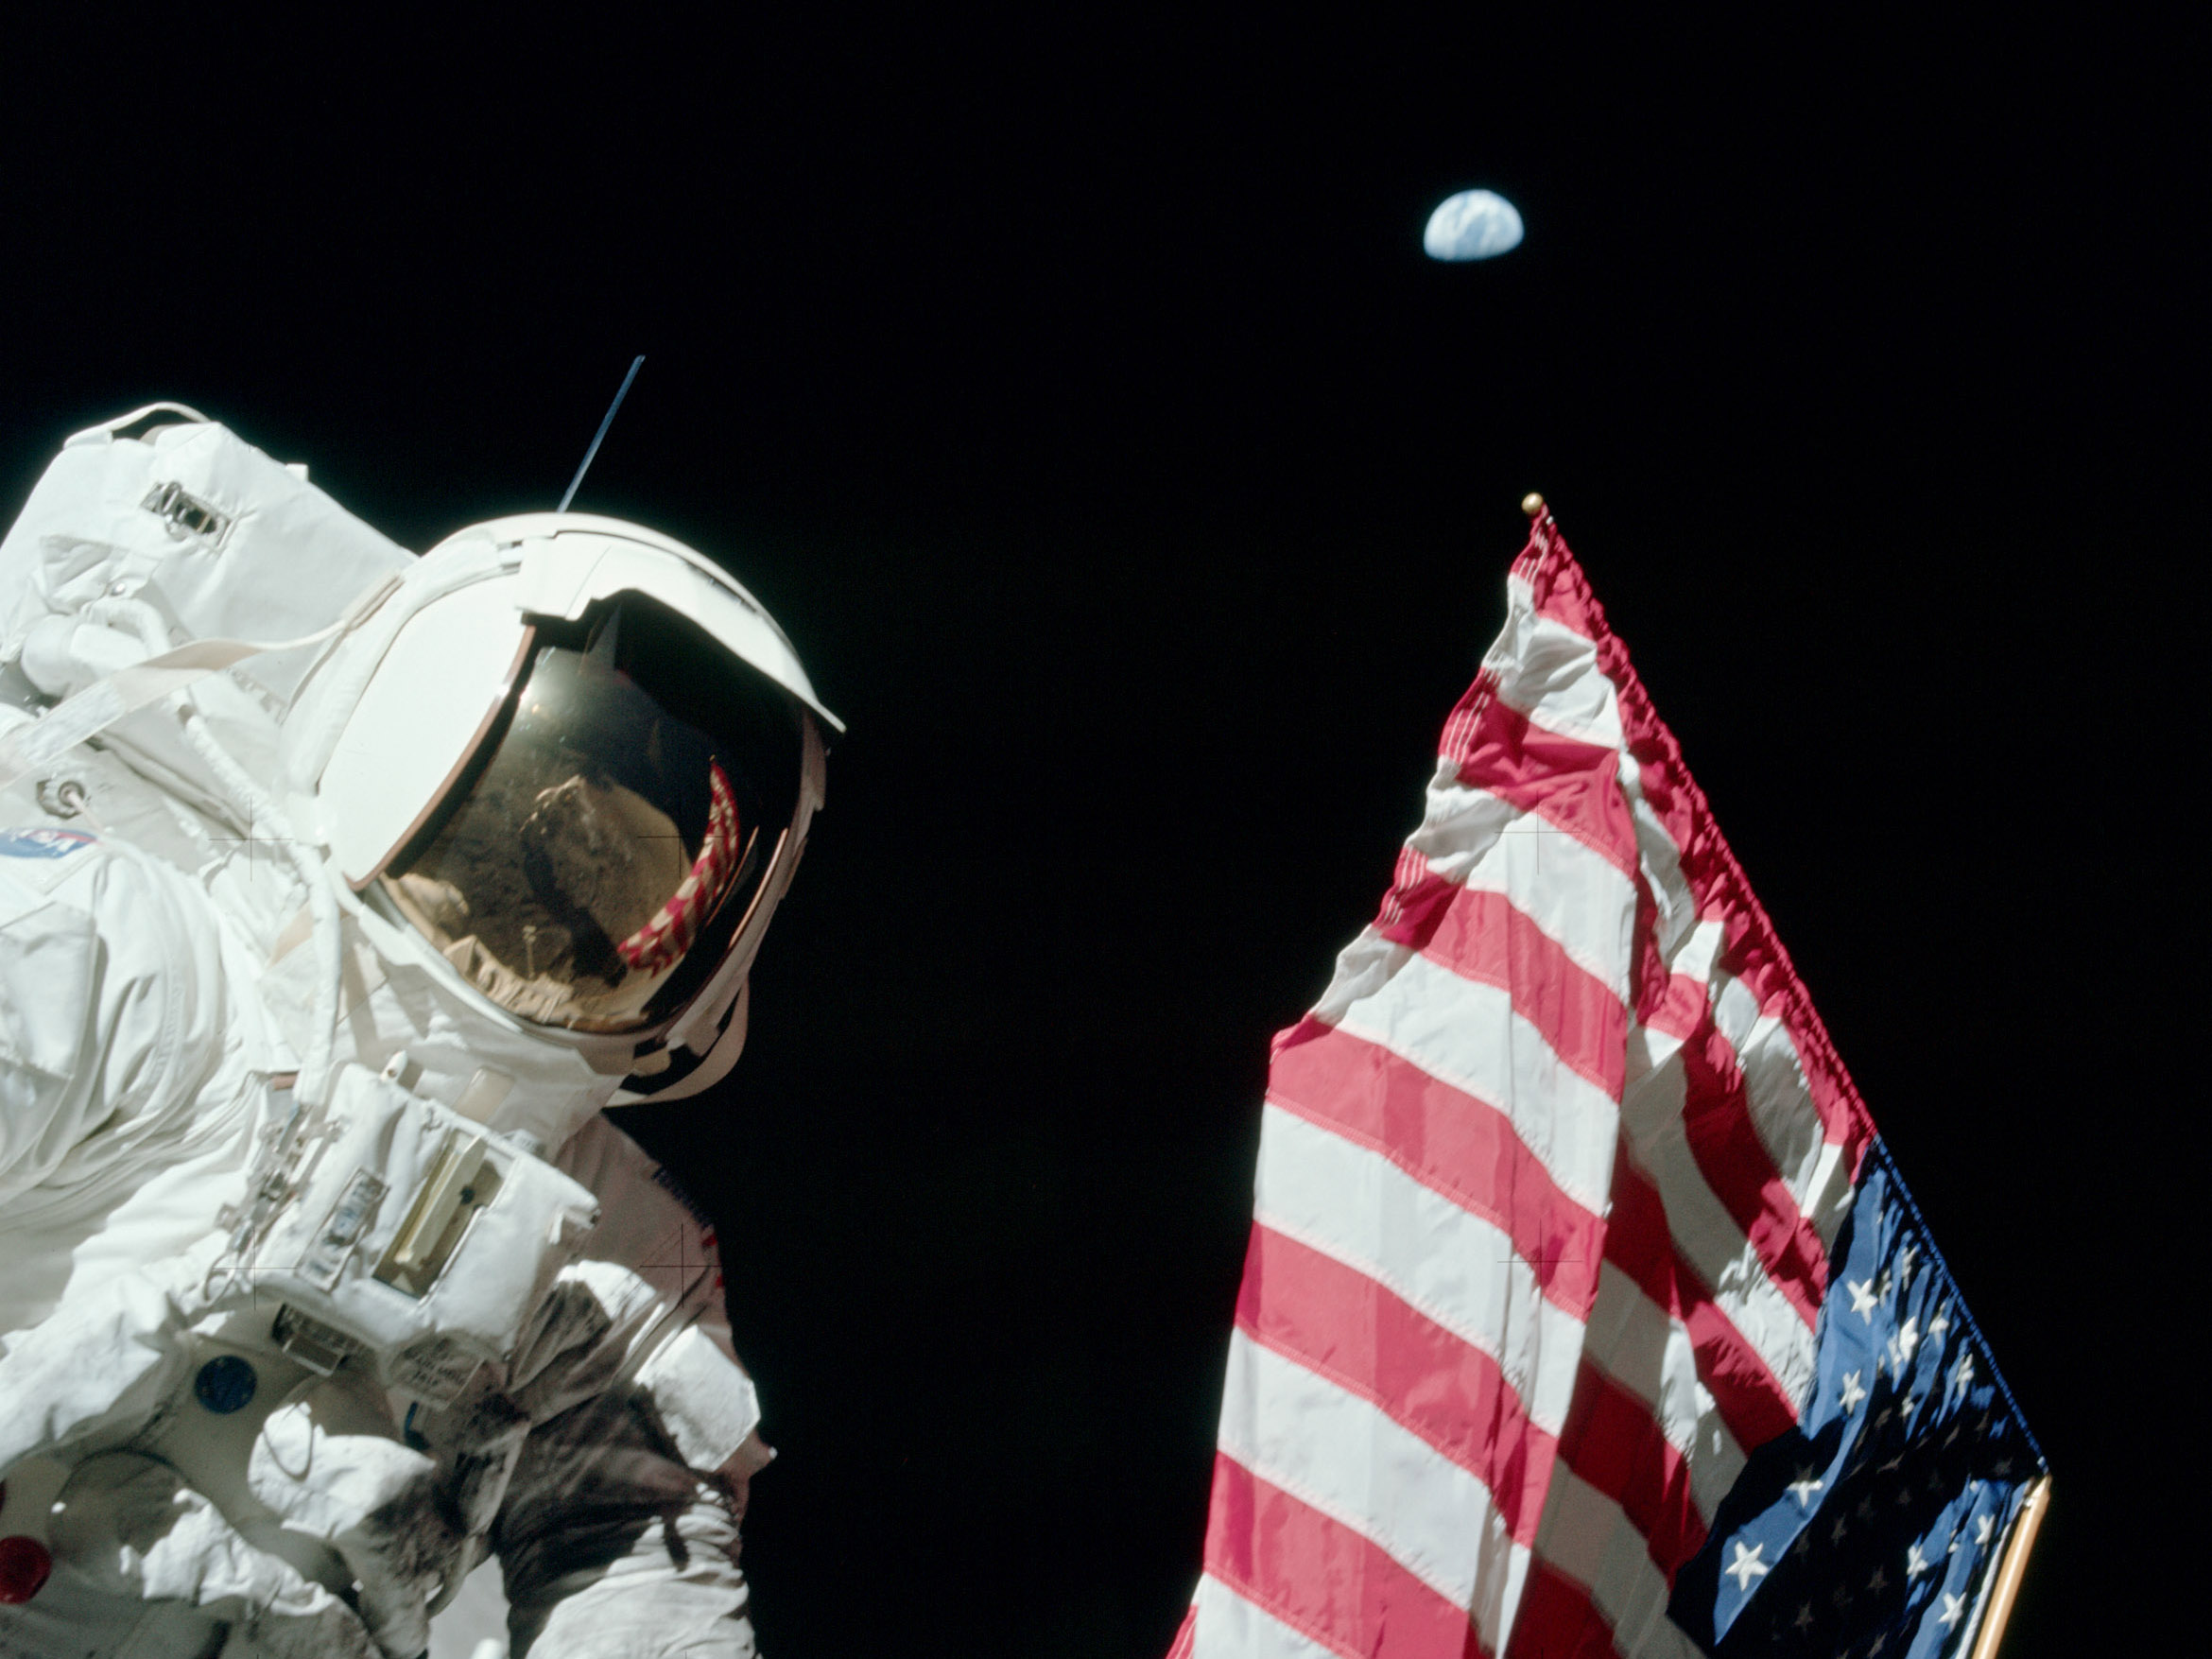 Apollo 17 astronaut Jack Schmitt with the U.S. flag, its pole pointing to Earth in the sky.